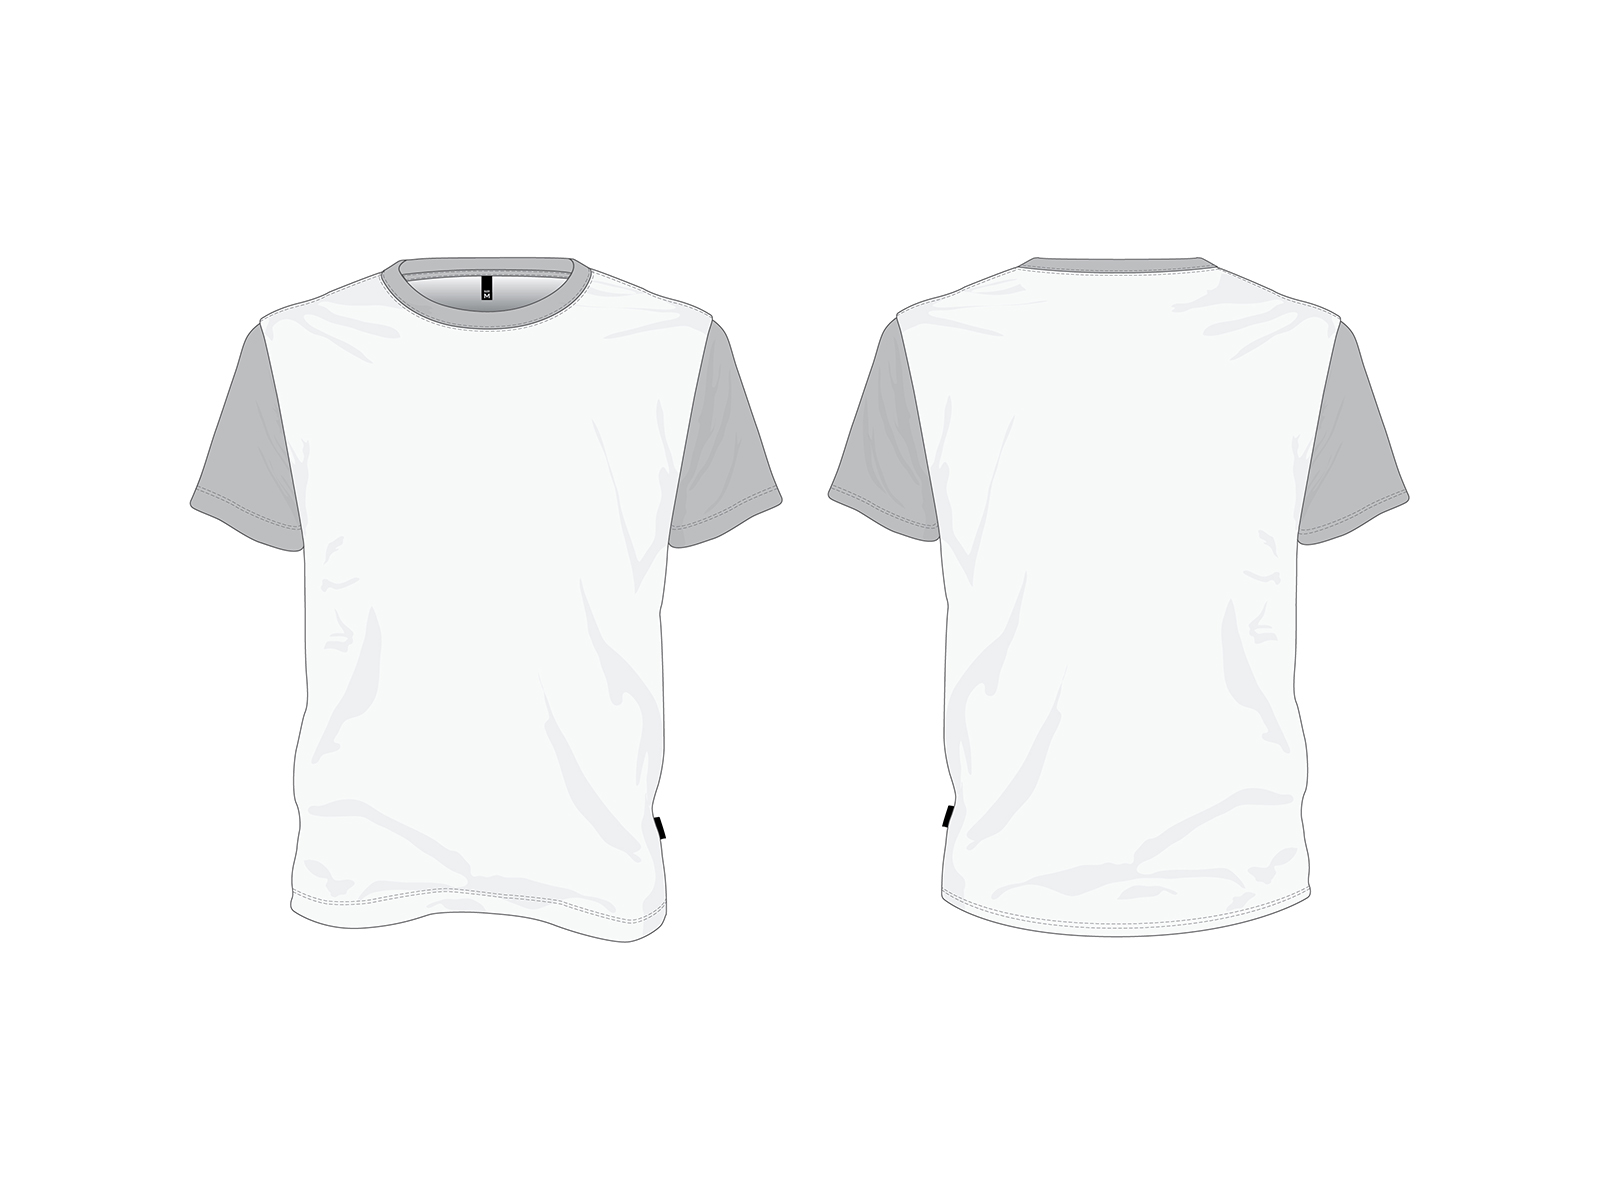 T Shirt Mock Up Vector Art, Icons, and Graphics for Free Download